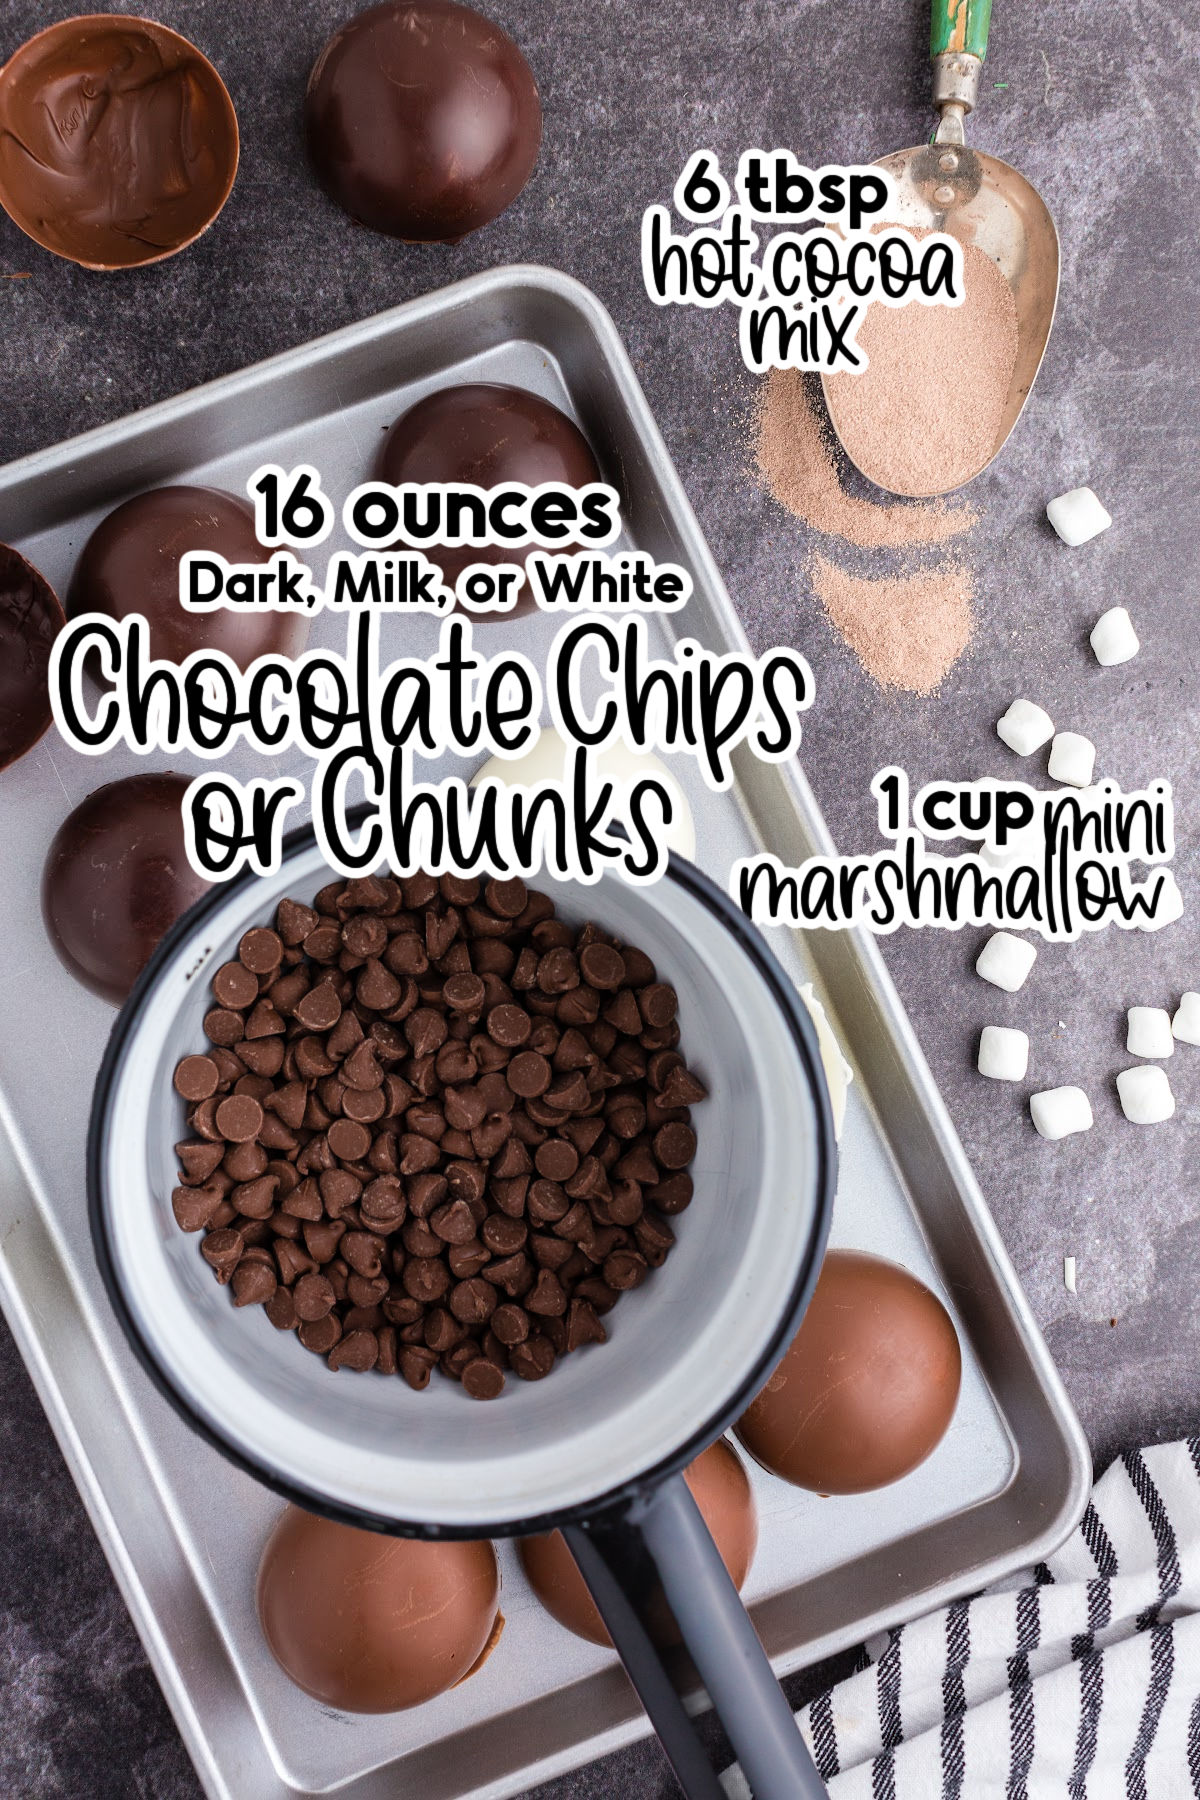 Pan with chocolate chips, scoop of hot cocoa mix, and mini marshmallows with text labels.